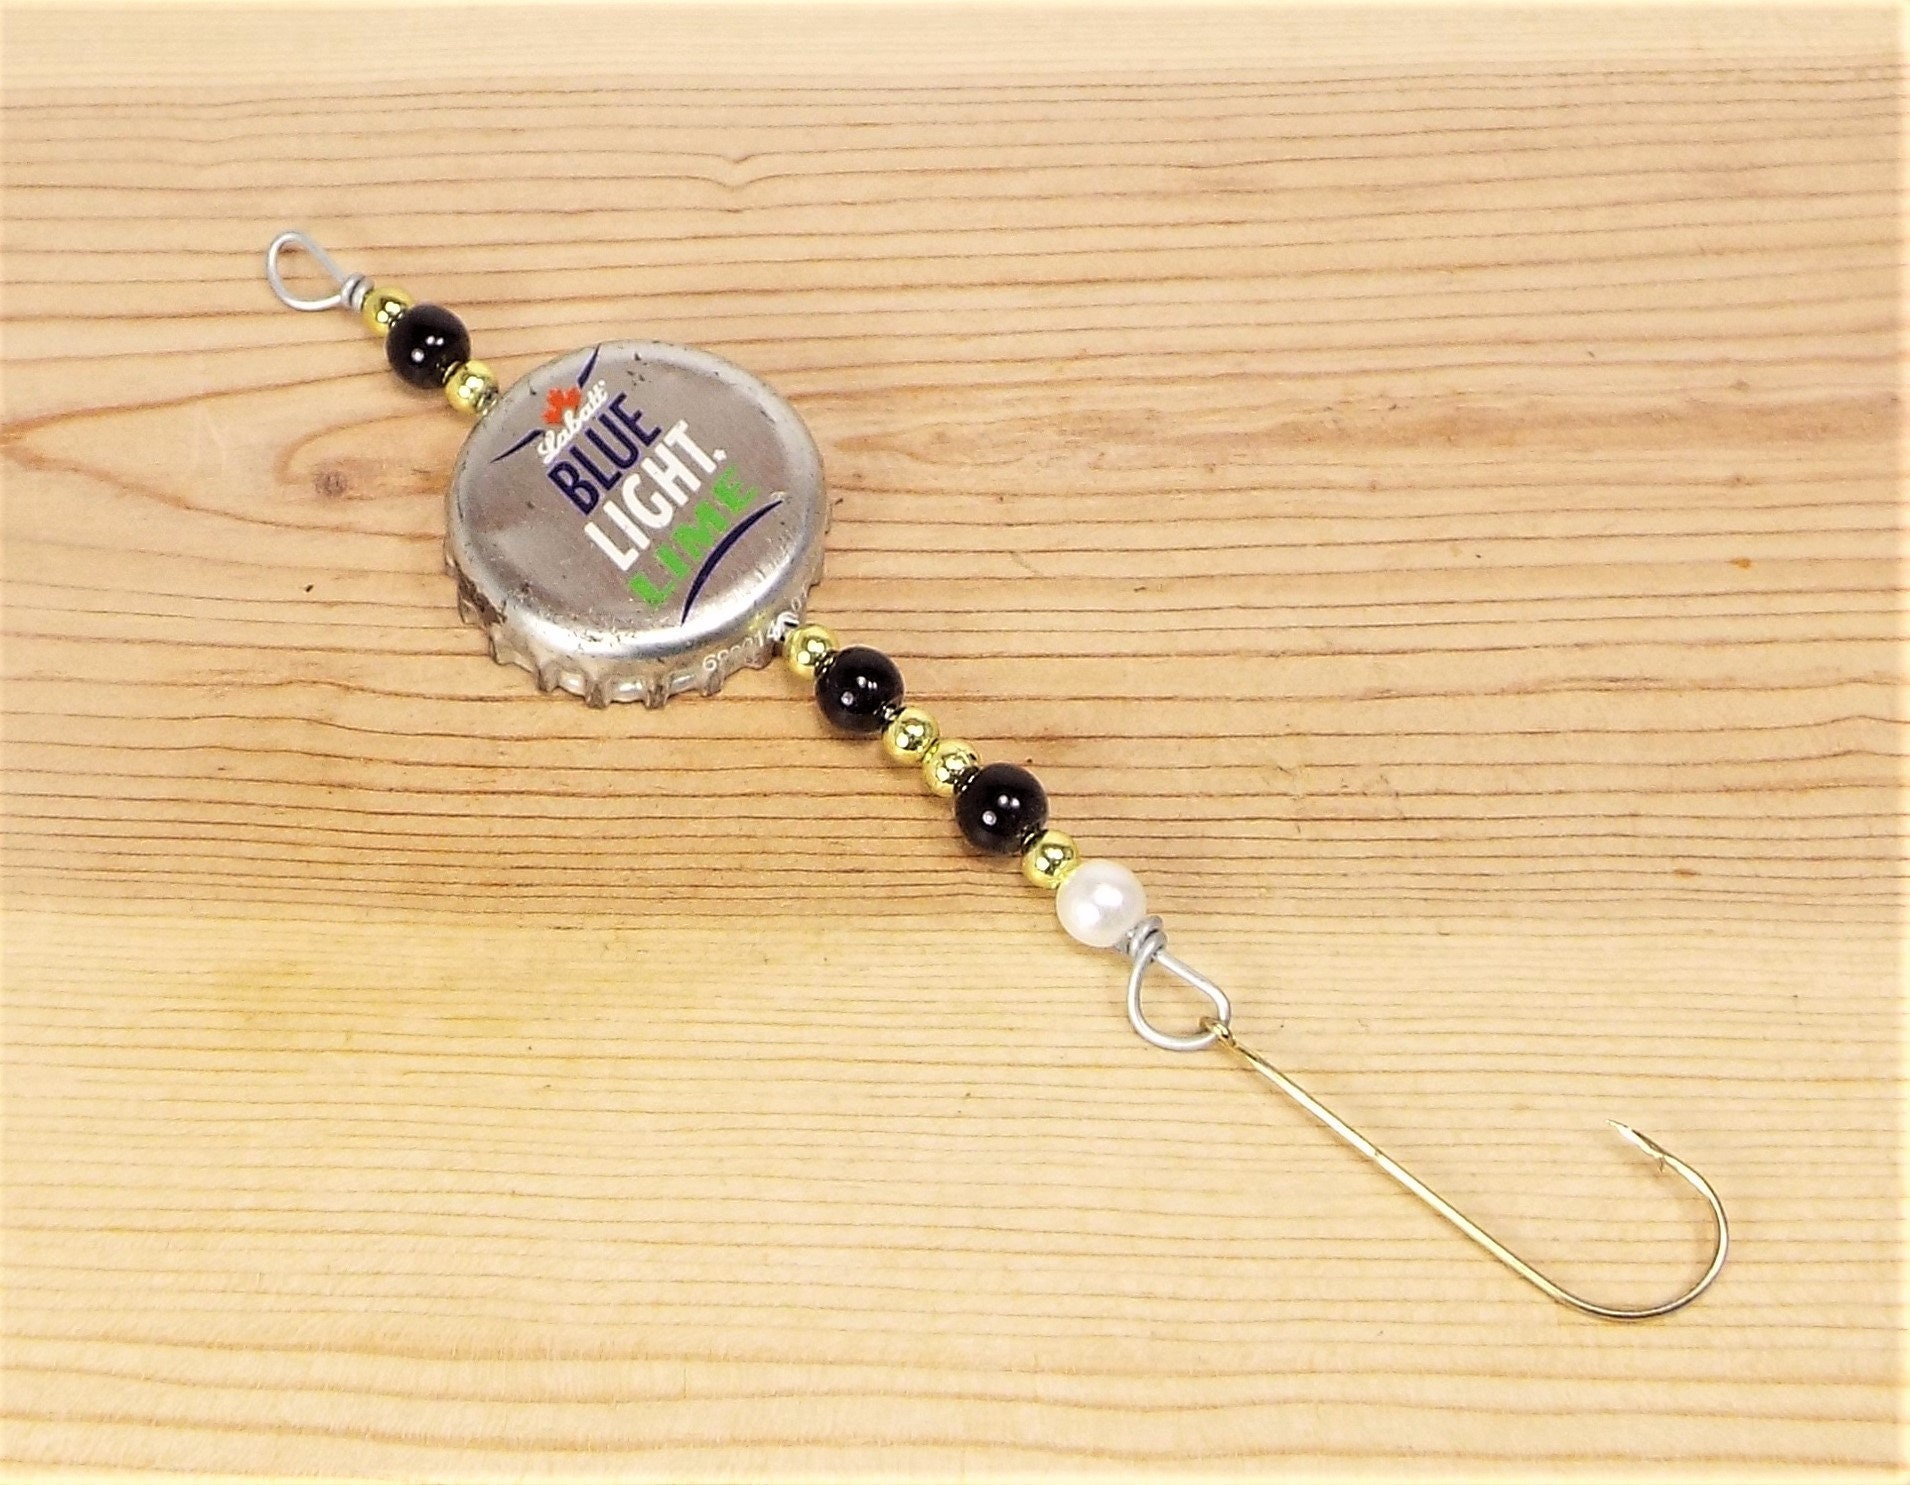 Bottle Cap Fishing Lure, Crafts, Gift, Handcrafted, Novelty Gift, Man Cave  Decor, Collectibles 